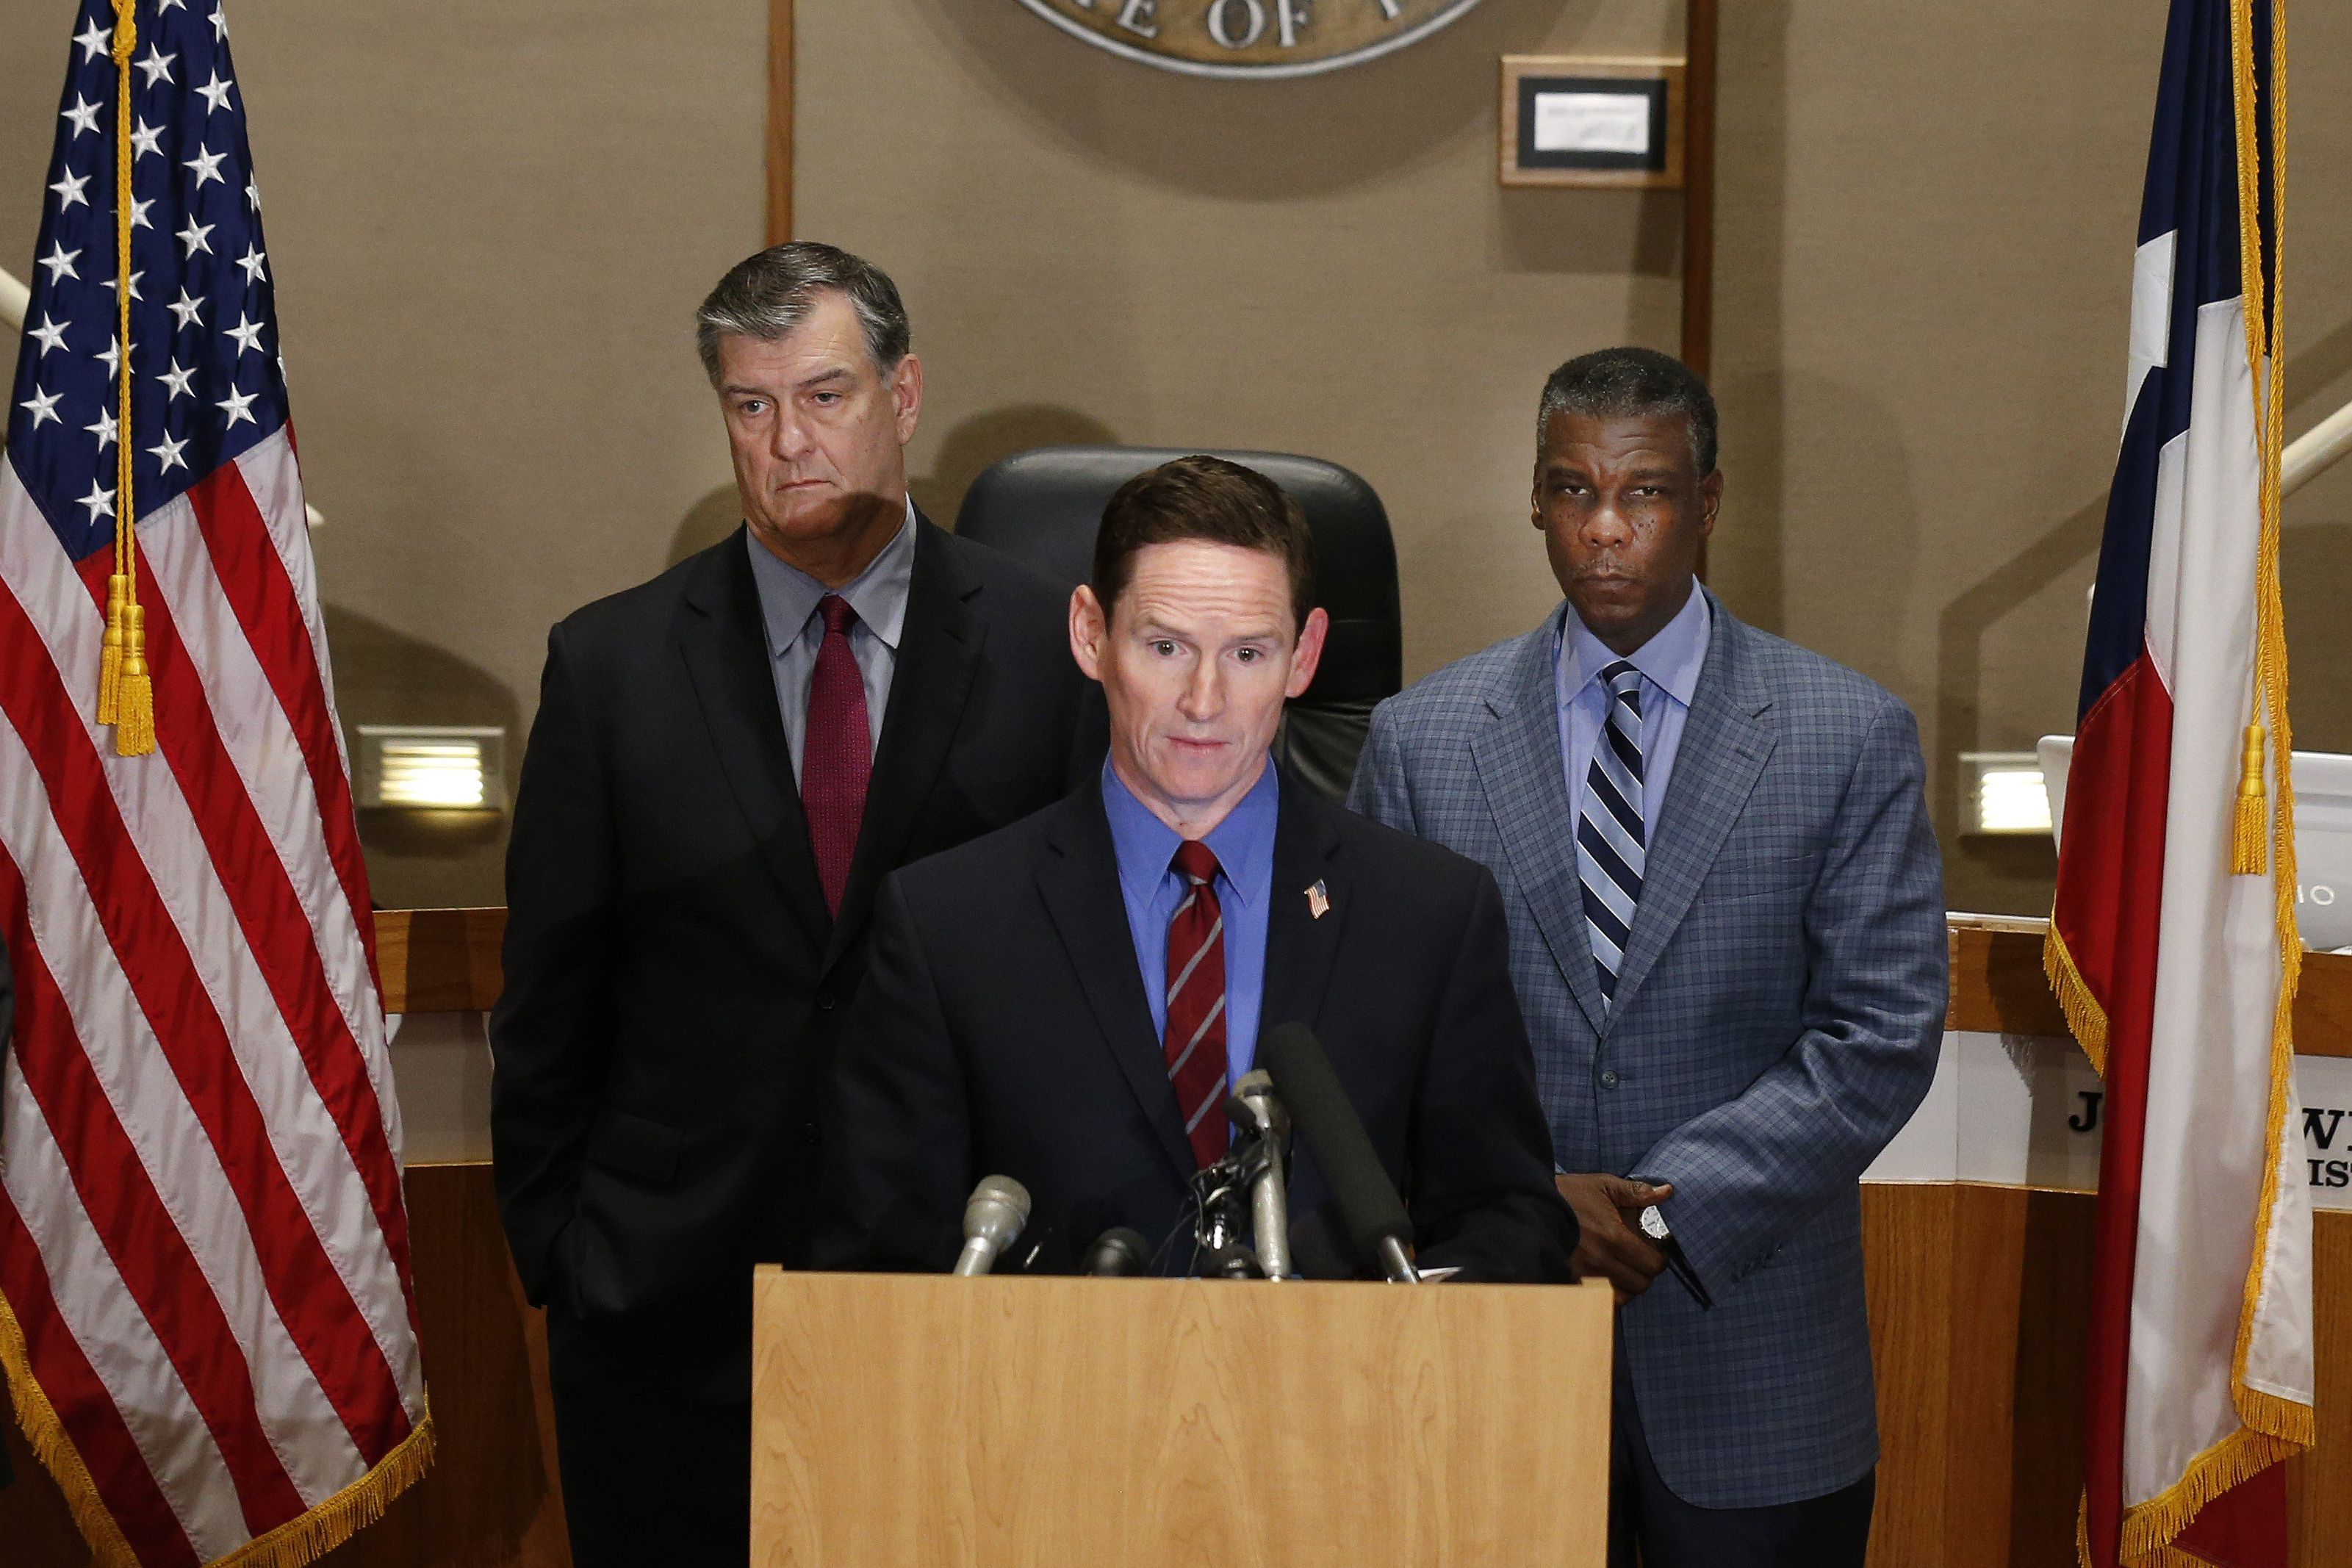 Dr. Daniel Varga, Chief Clinical Officer, Senior Executive Vice President, Dallas Mayor Mike Rawlings, Dallas County Judge Clay Jenkins and Dallas County Human and Health Service Director Zach Thompson held a news conference about the new Ebola case on Oct. 15, 2014 at Dallas County Commissioners Court in Dallas.